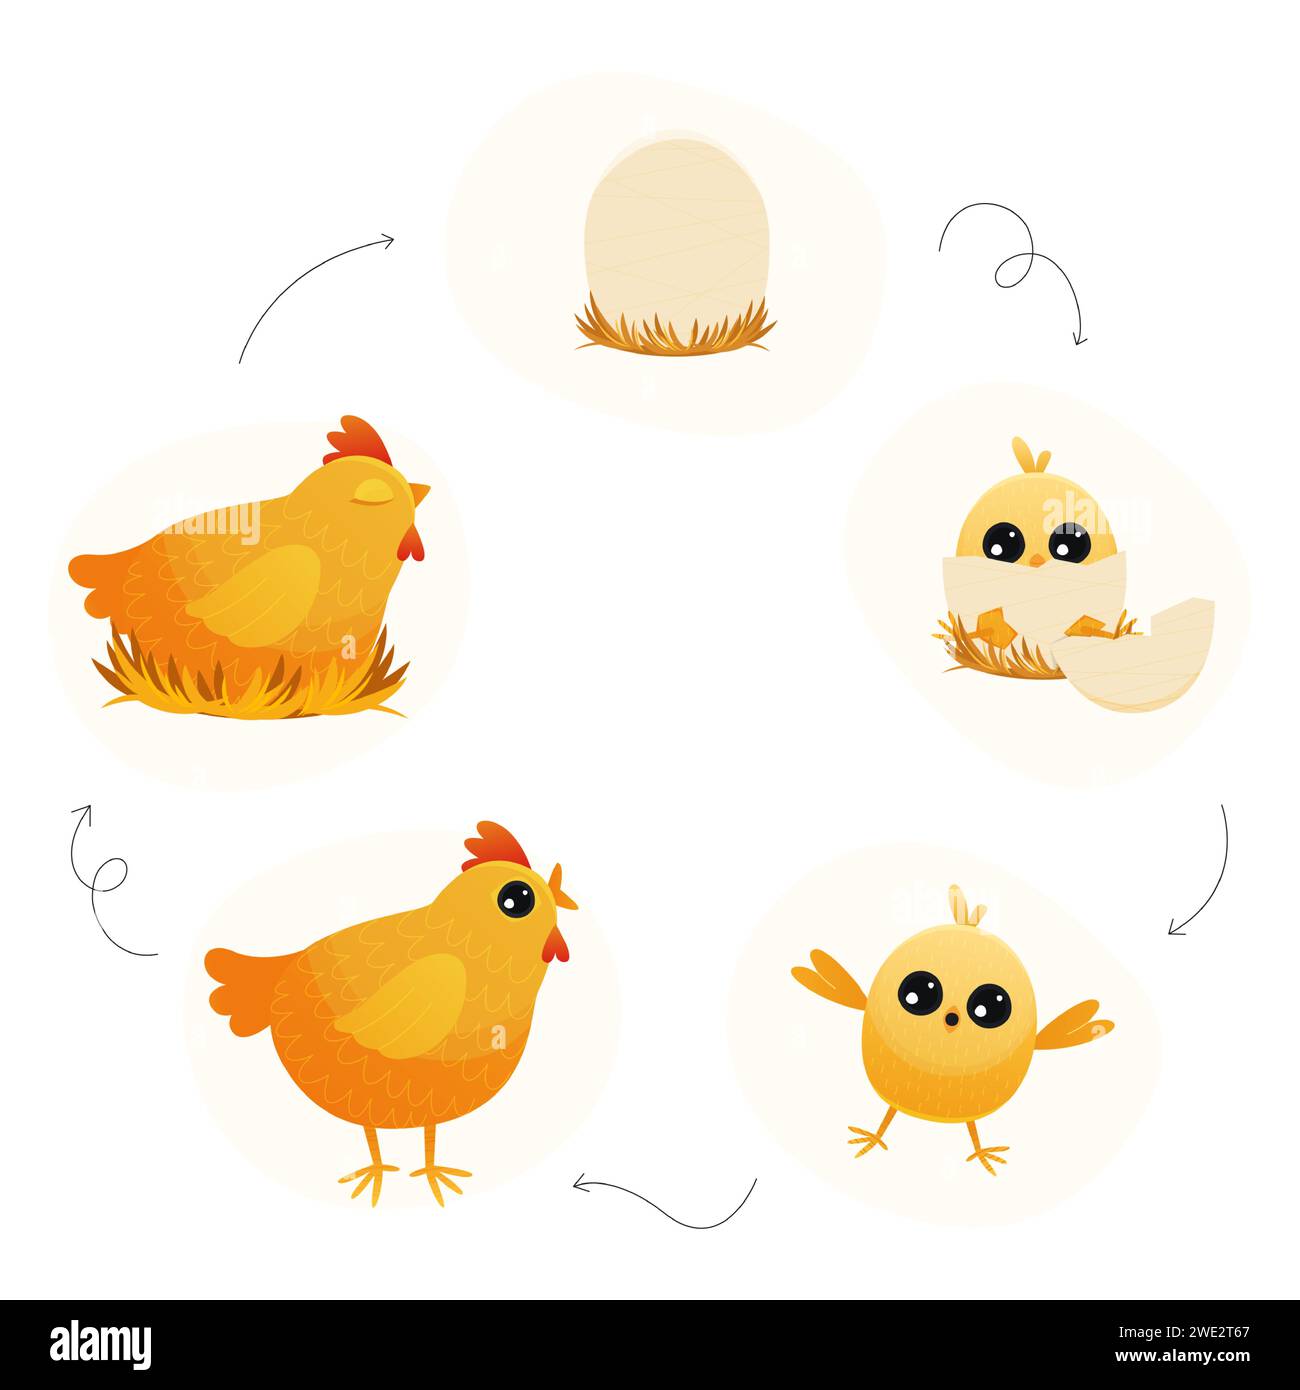 Chicken life cycle. Cartoon broody hen with chicks and eggs, step by step from egg to adult and back, chicken embryo to adult and chicks. Vector Stock Vector